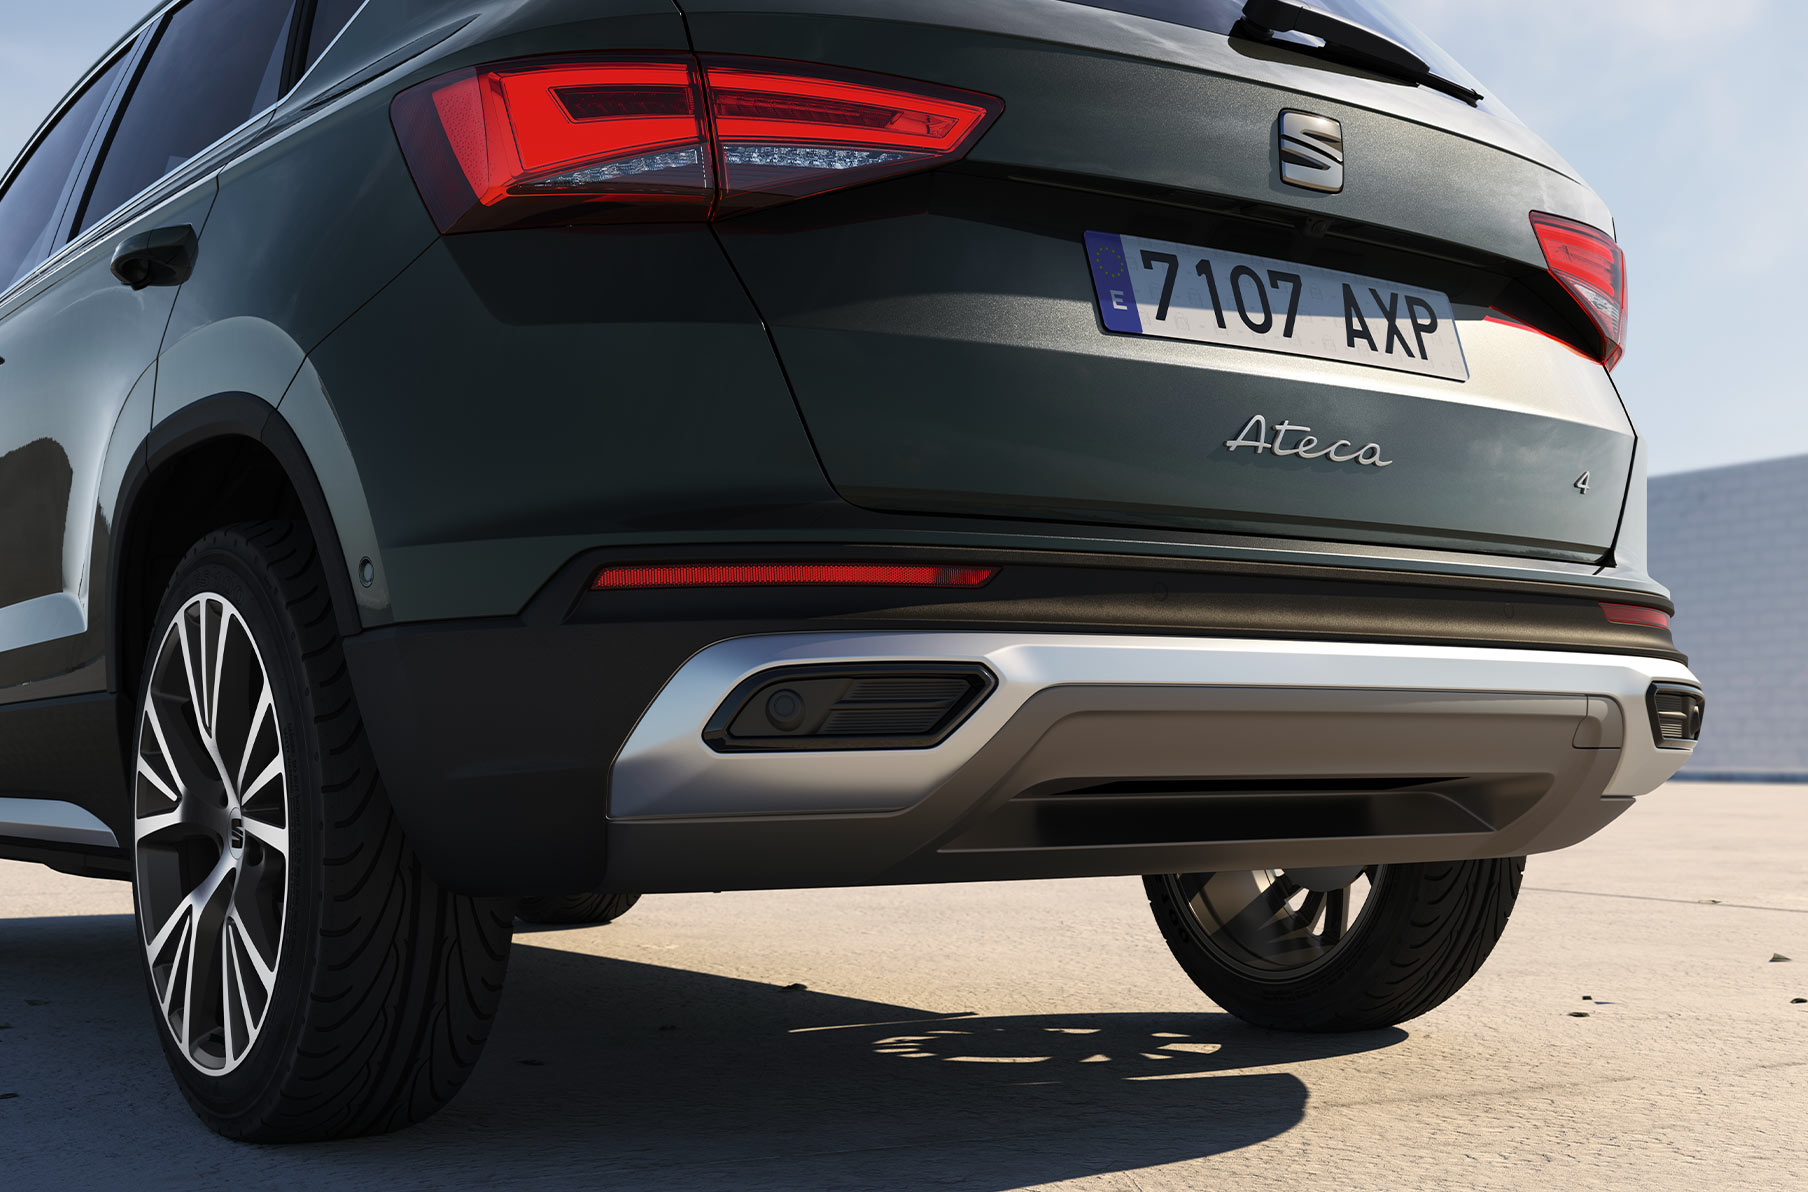 seat-ateca-dark-camouflage-colour-with-rear-exhaust-pipes